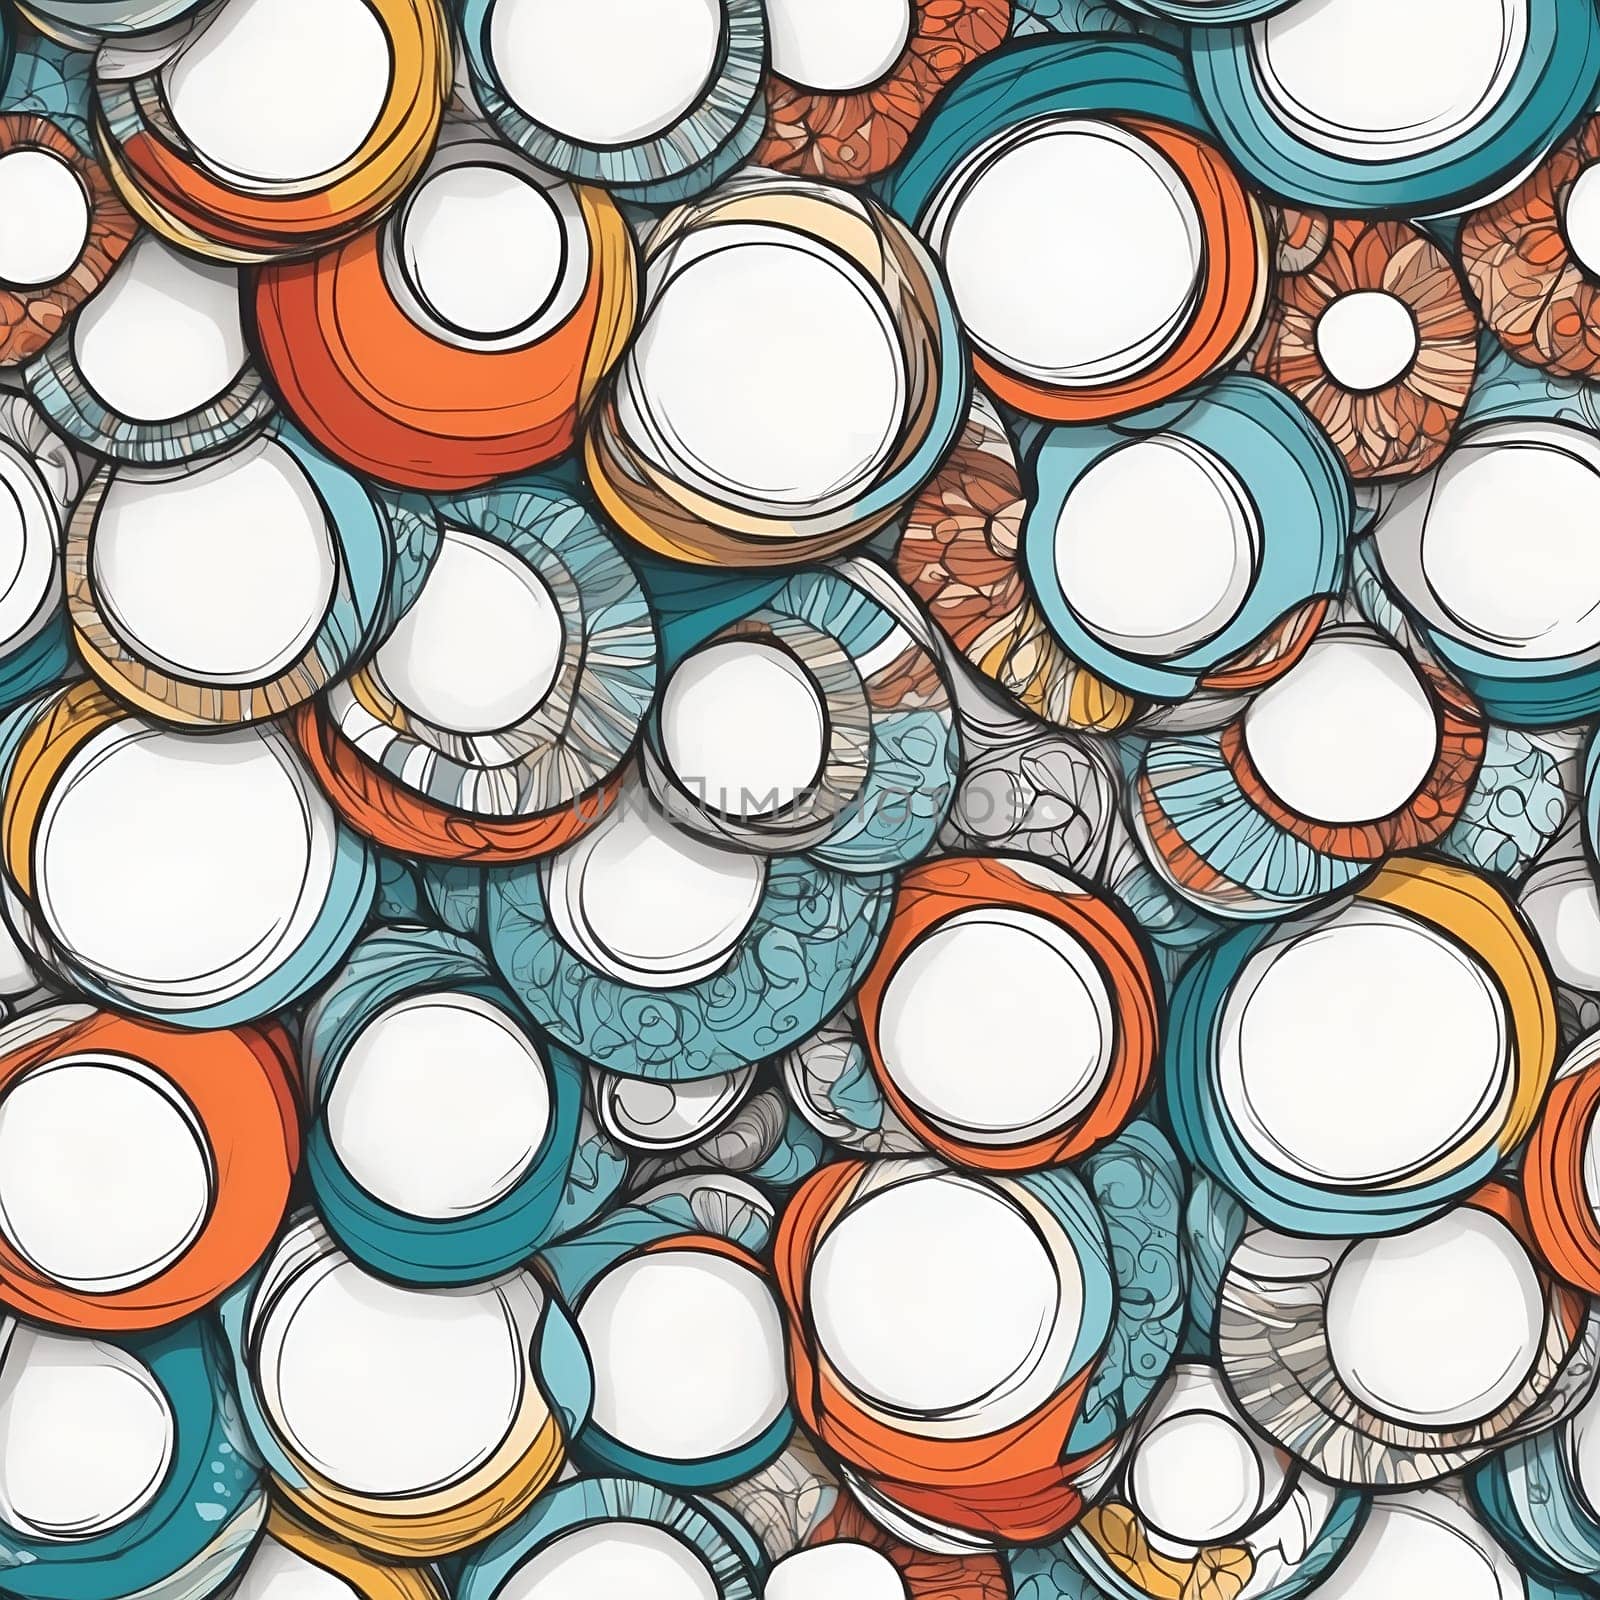 A collection of various plates neatly arranged on a table in a seamless pattern.